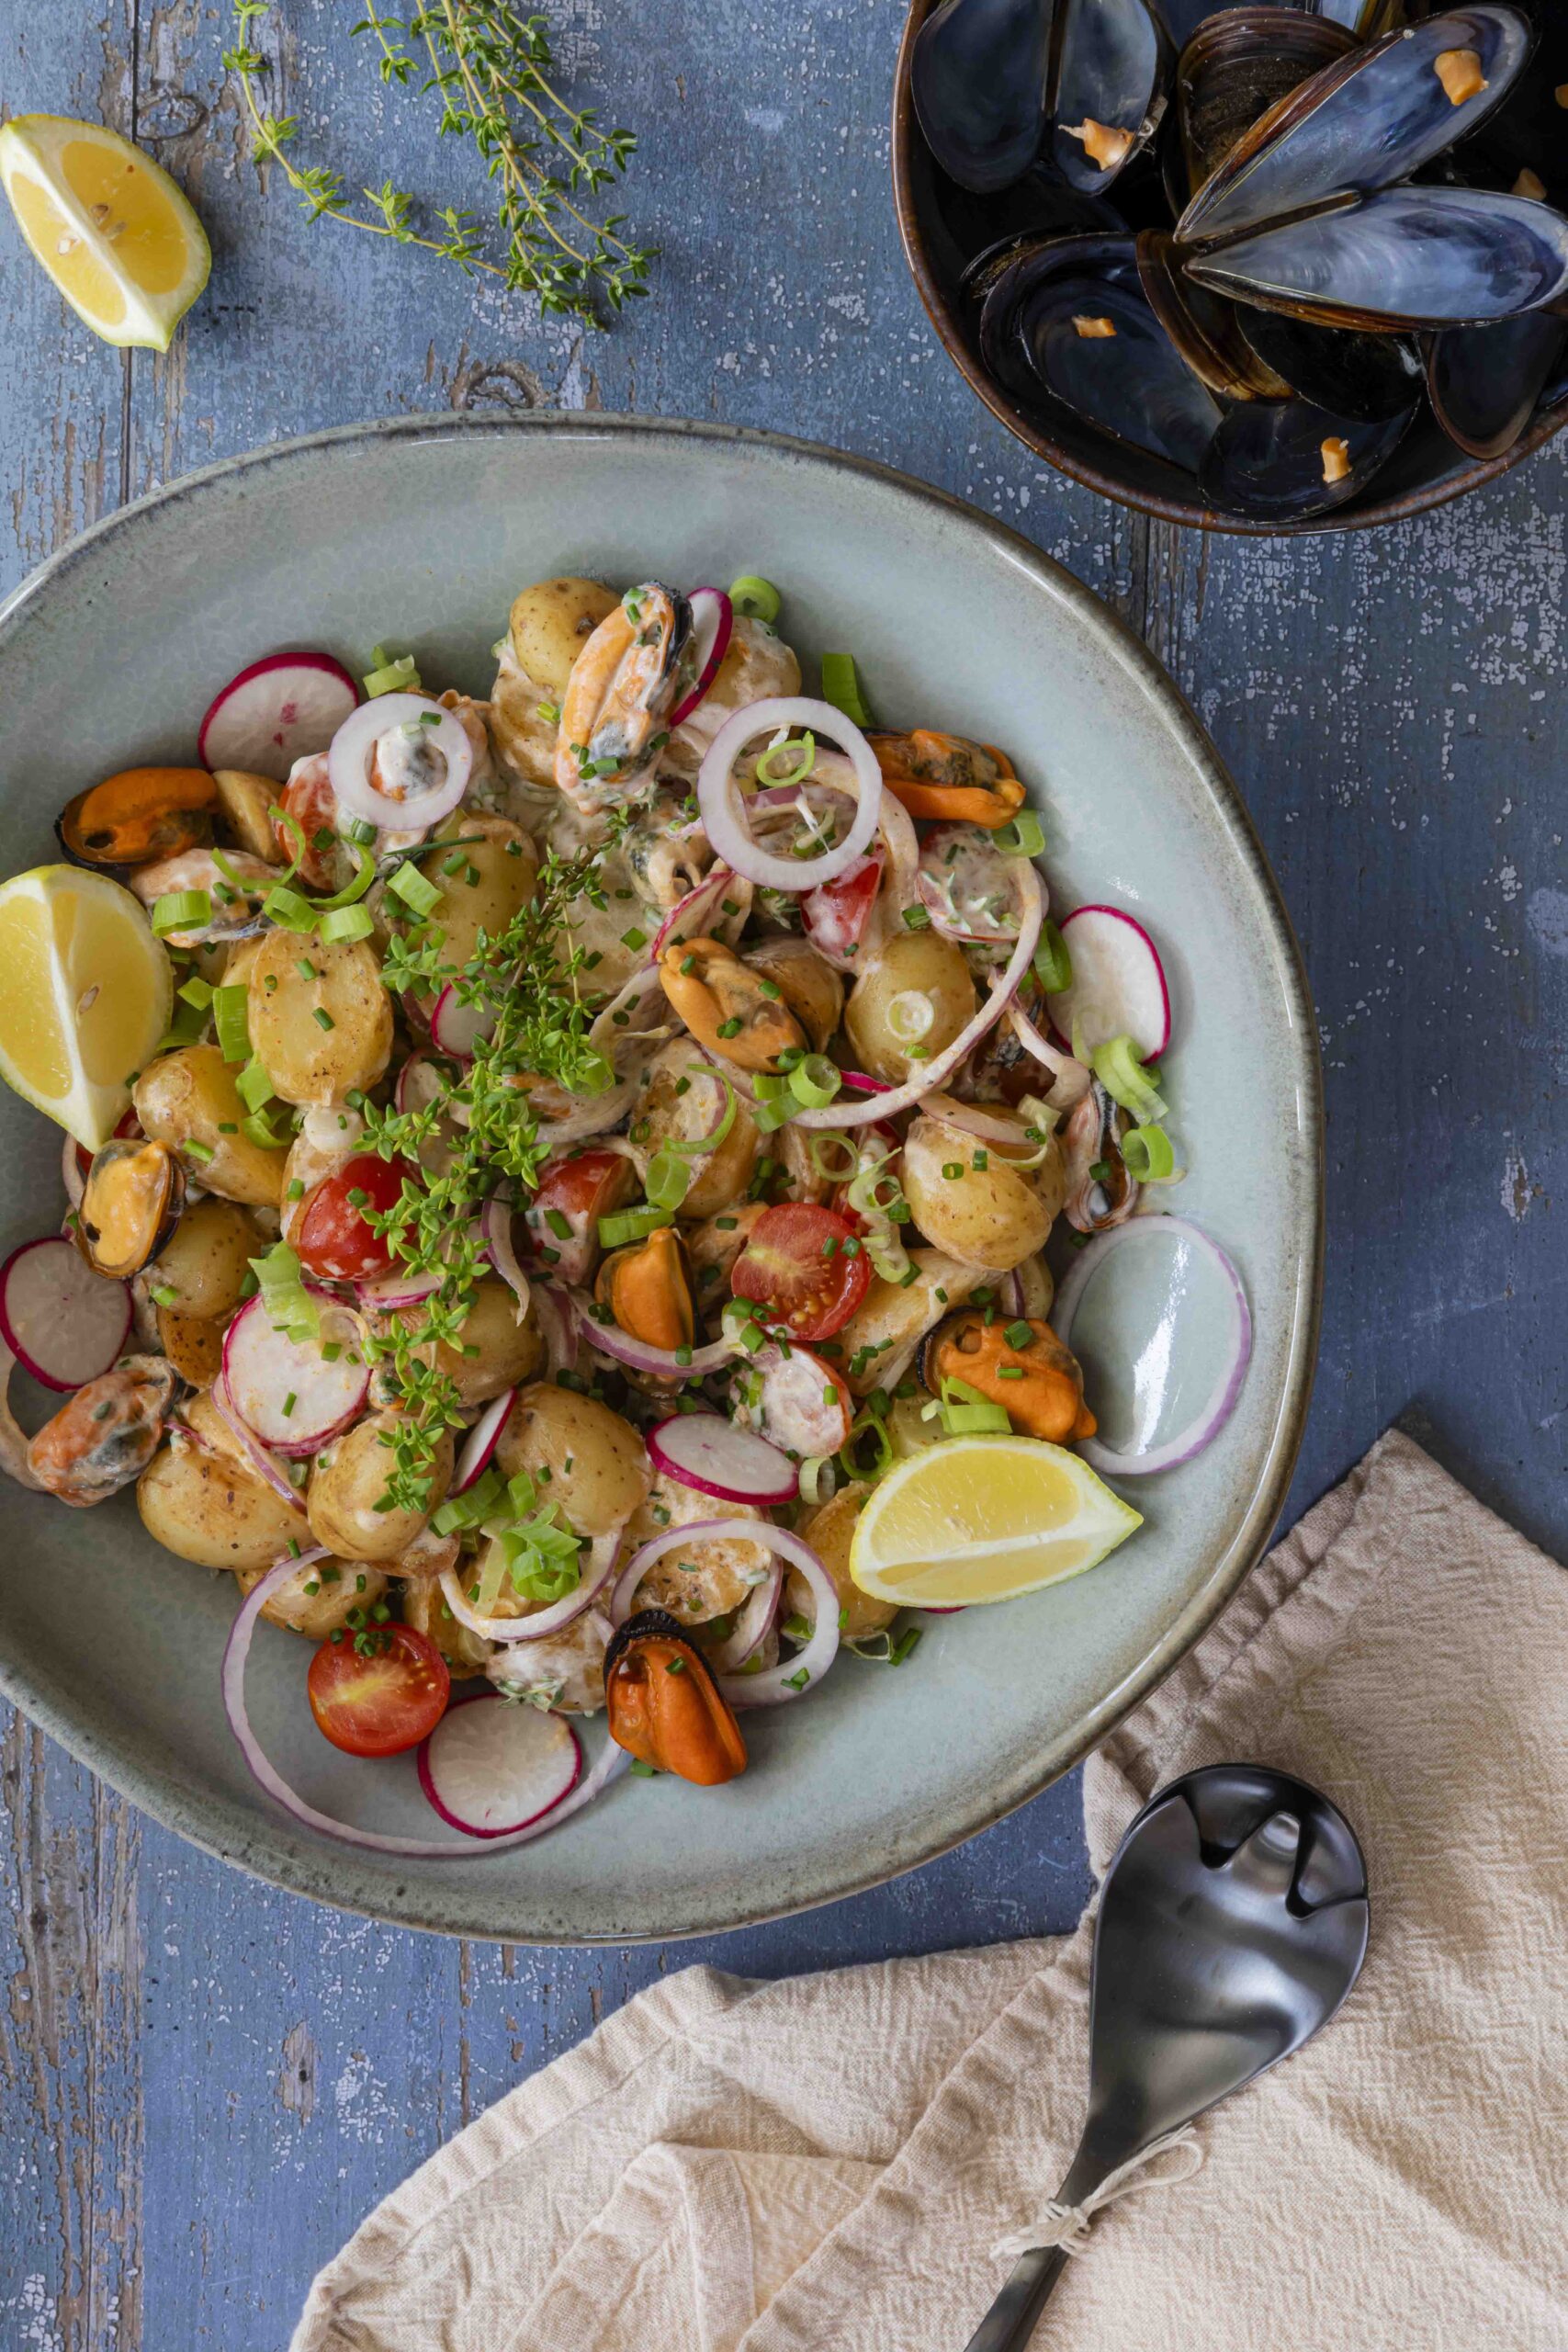 Potato salad with mussels